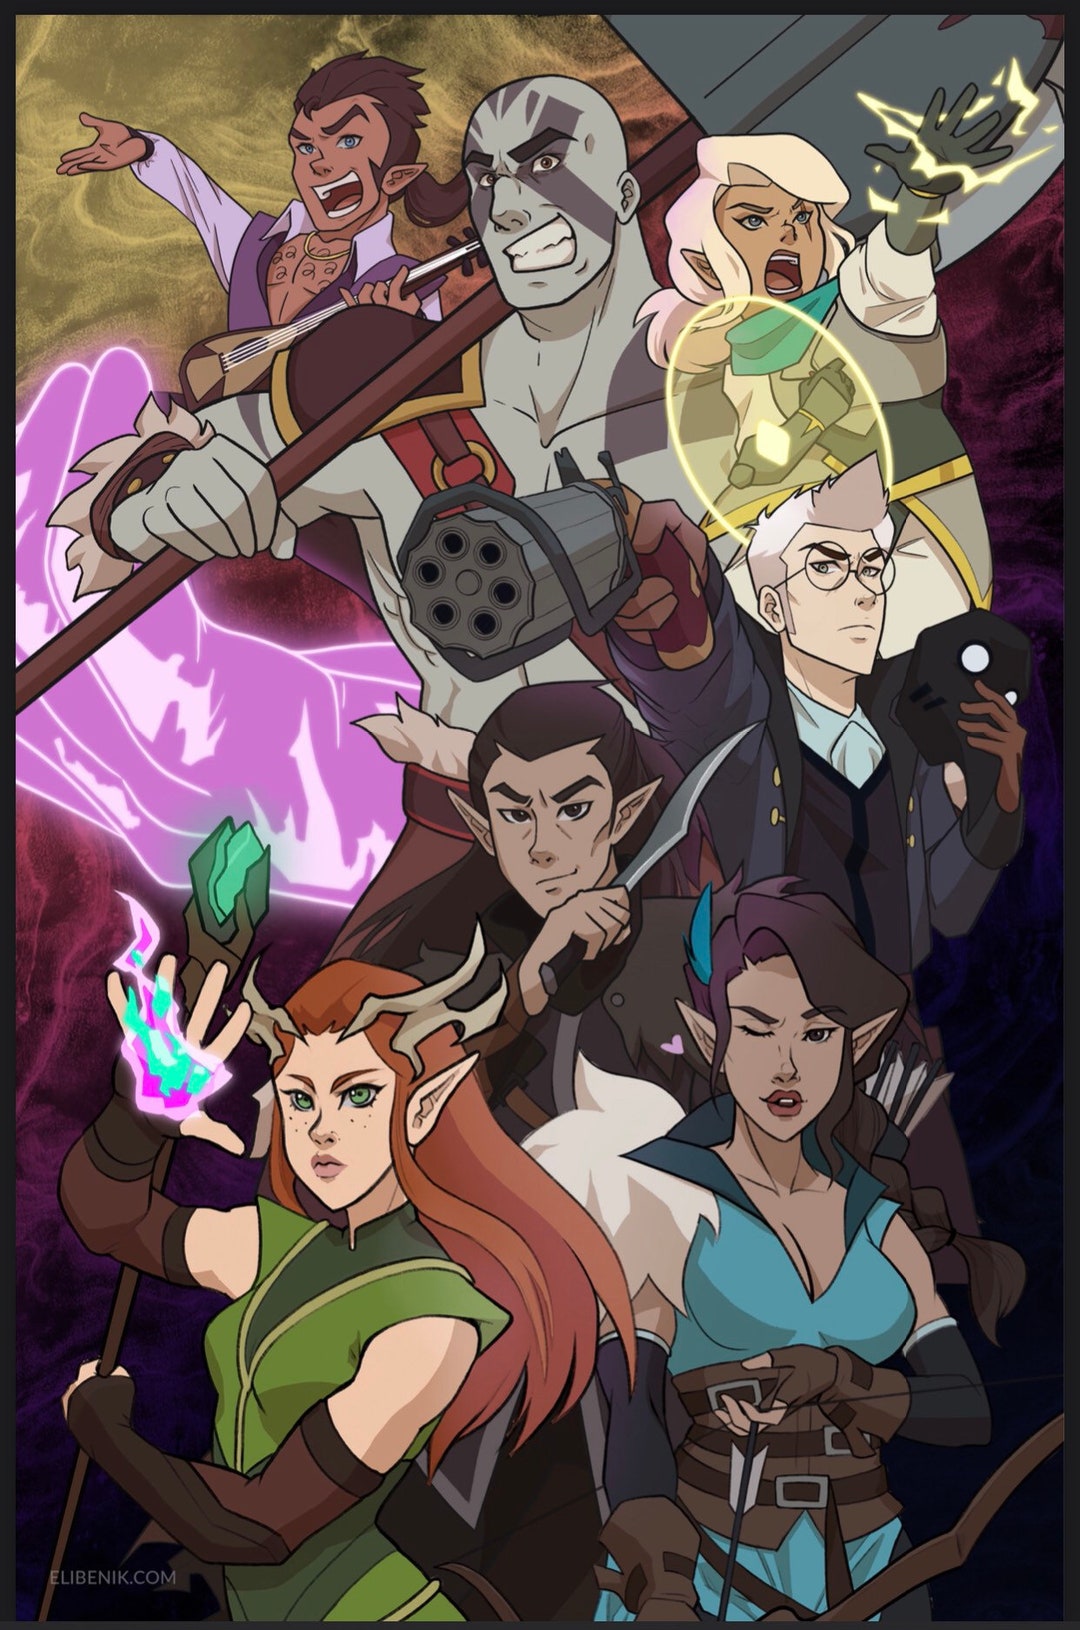 Critical Role - The Legend of Vox Machina Animated Special - RPGista